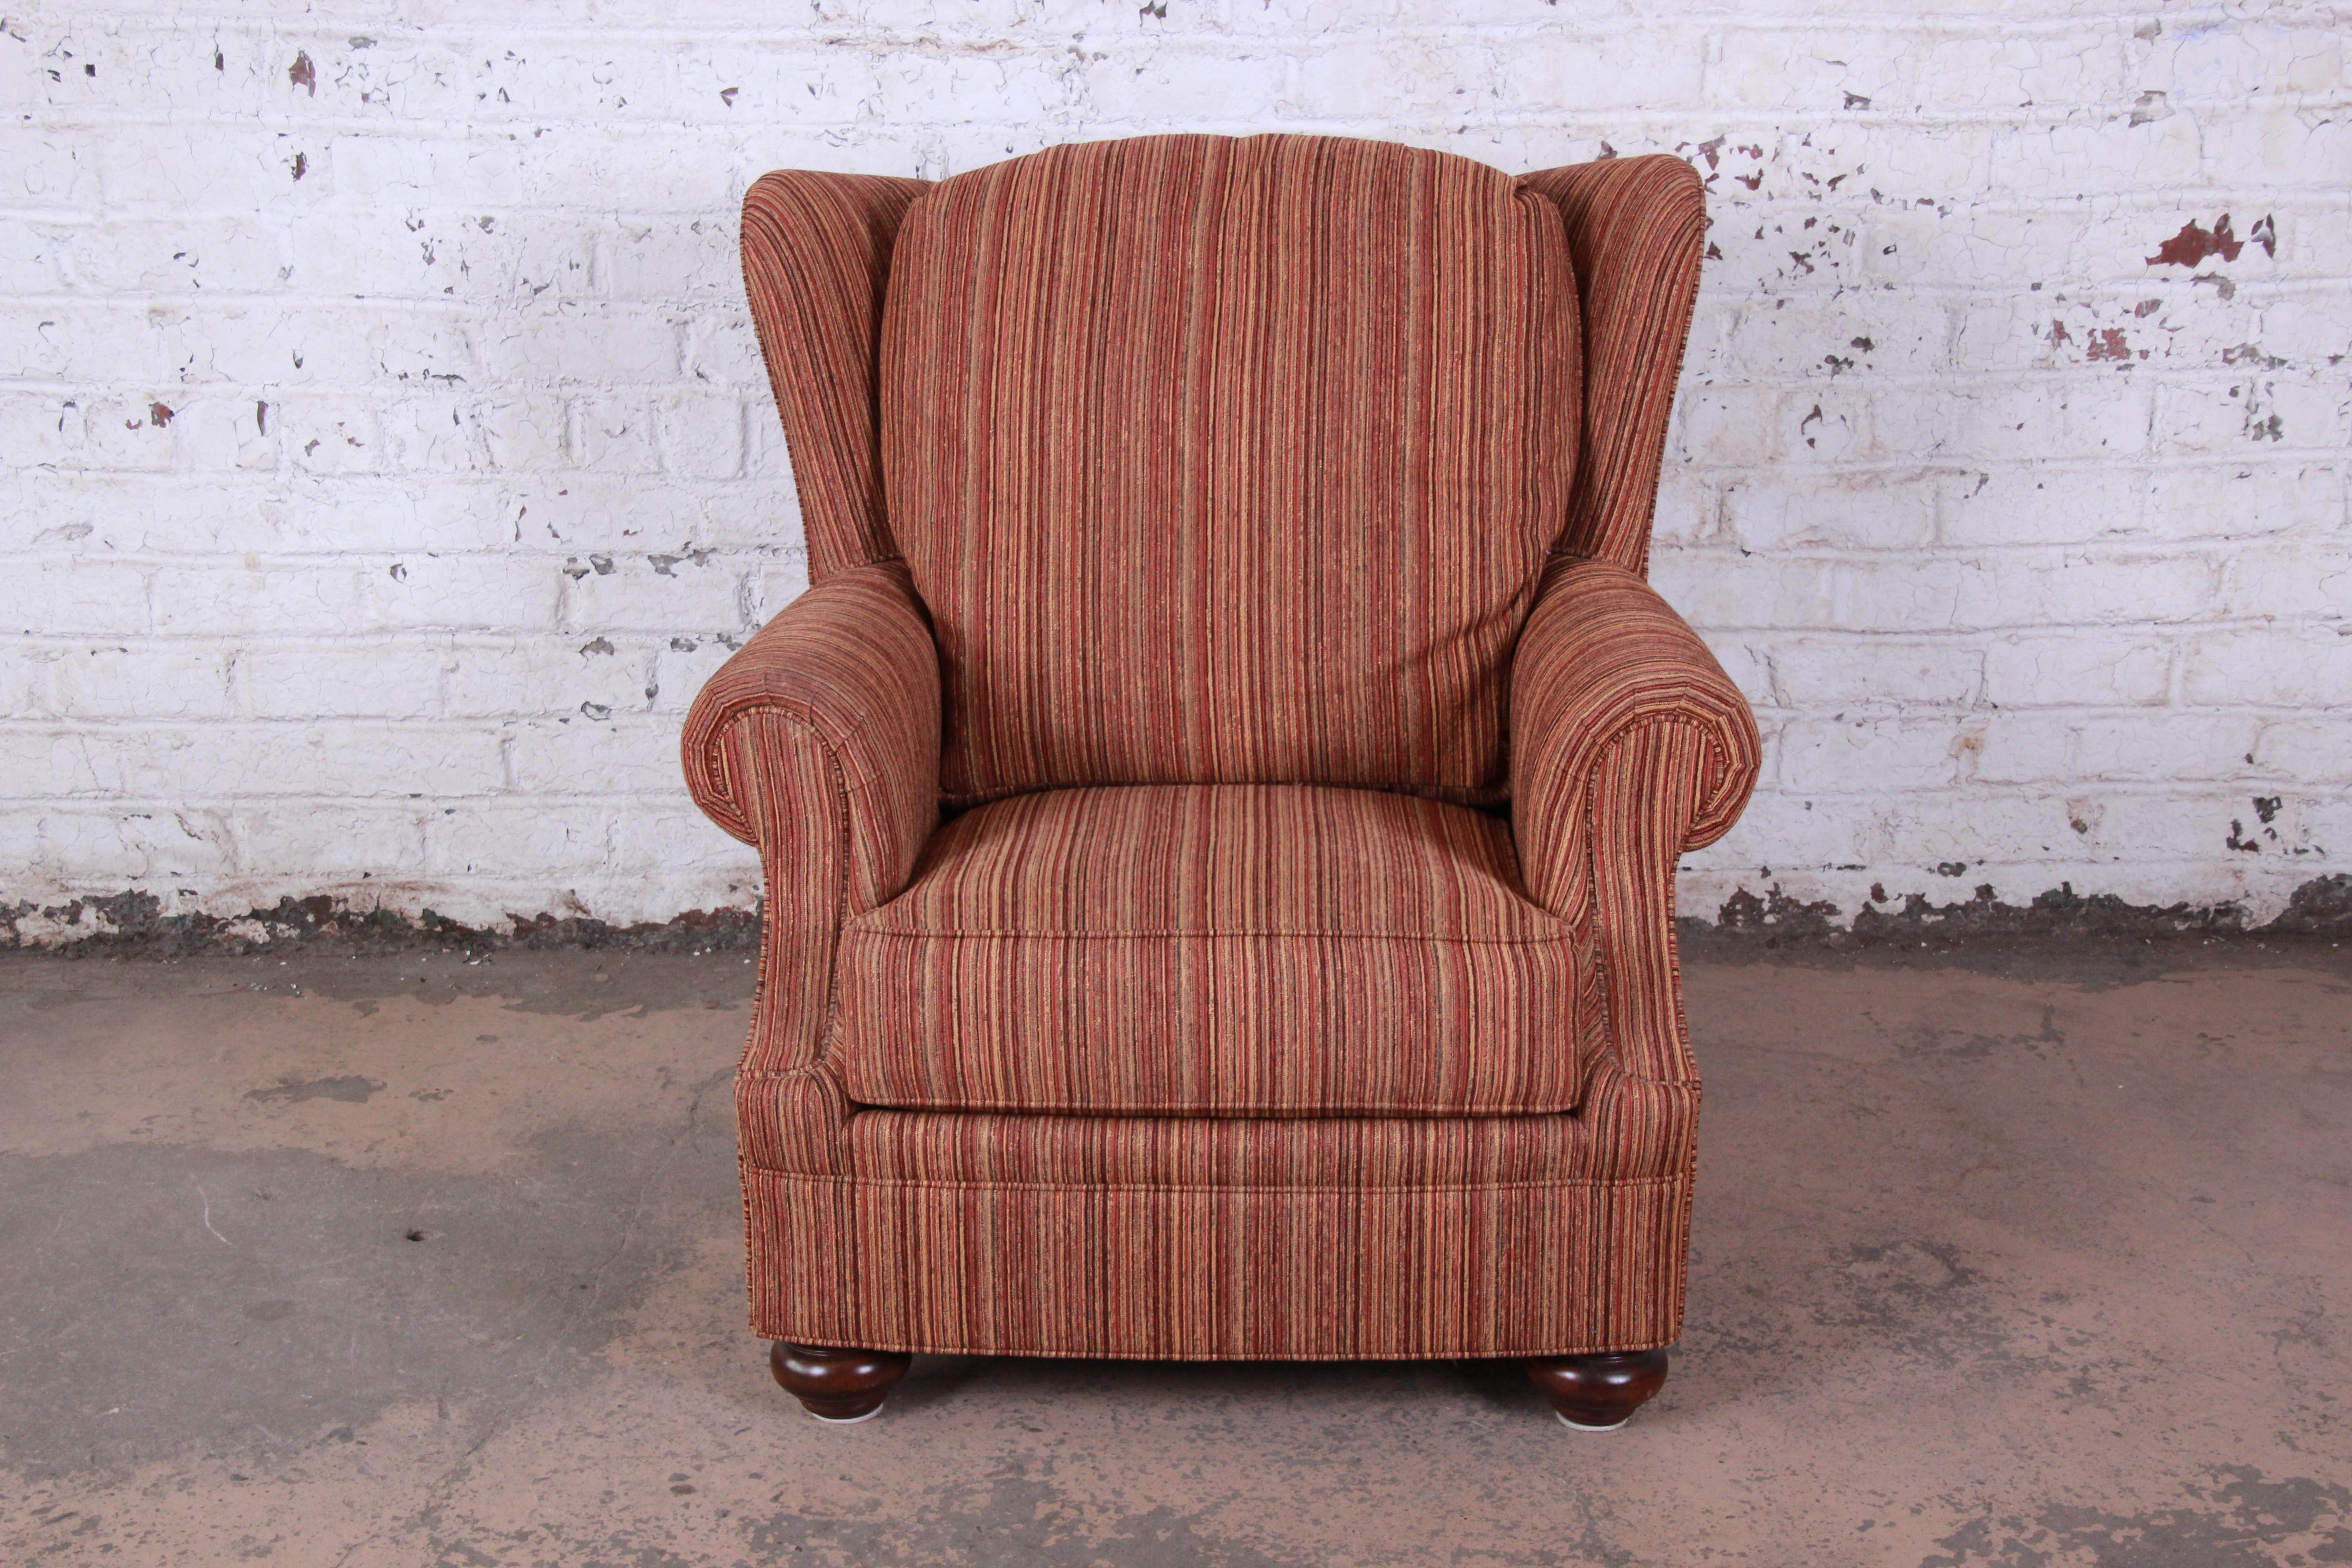 A gorgeous contemporary wingback lounge chair by Stickley. The chair features beautiful orange striped upholstery and a nice traditional style. It is very well made, as expected from Stickley. The original label is present. The chair is in excellent